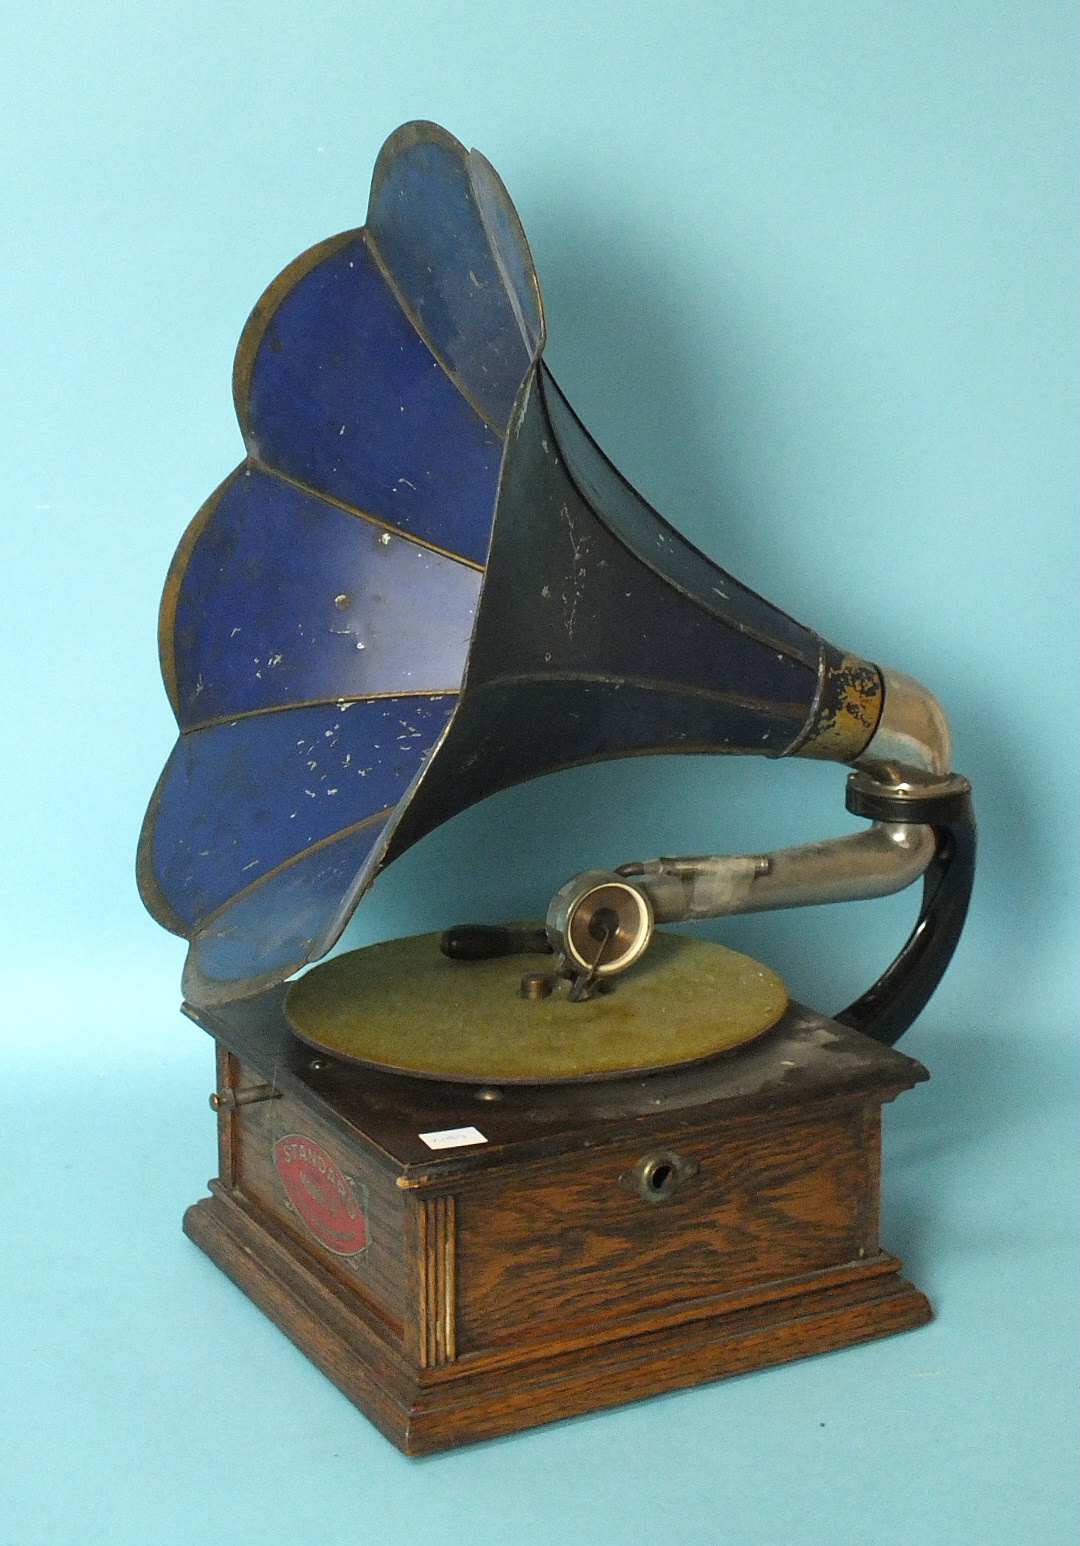 An early-20th century Standard Talking Machine Co. Standard Model A horn table-top gramophone, the